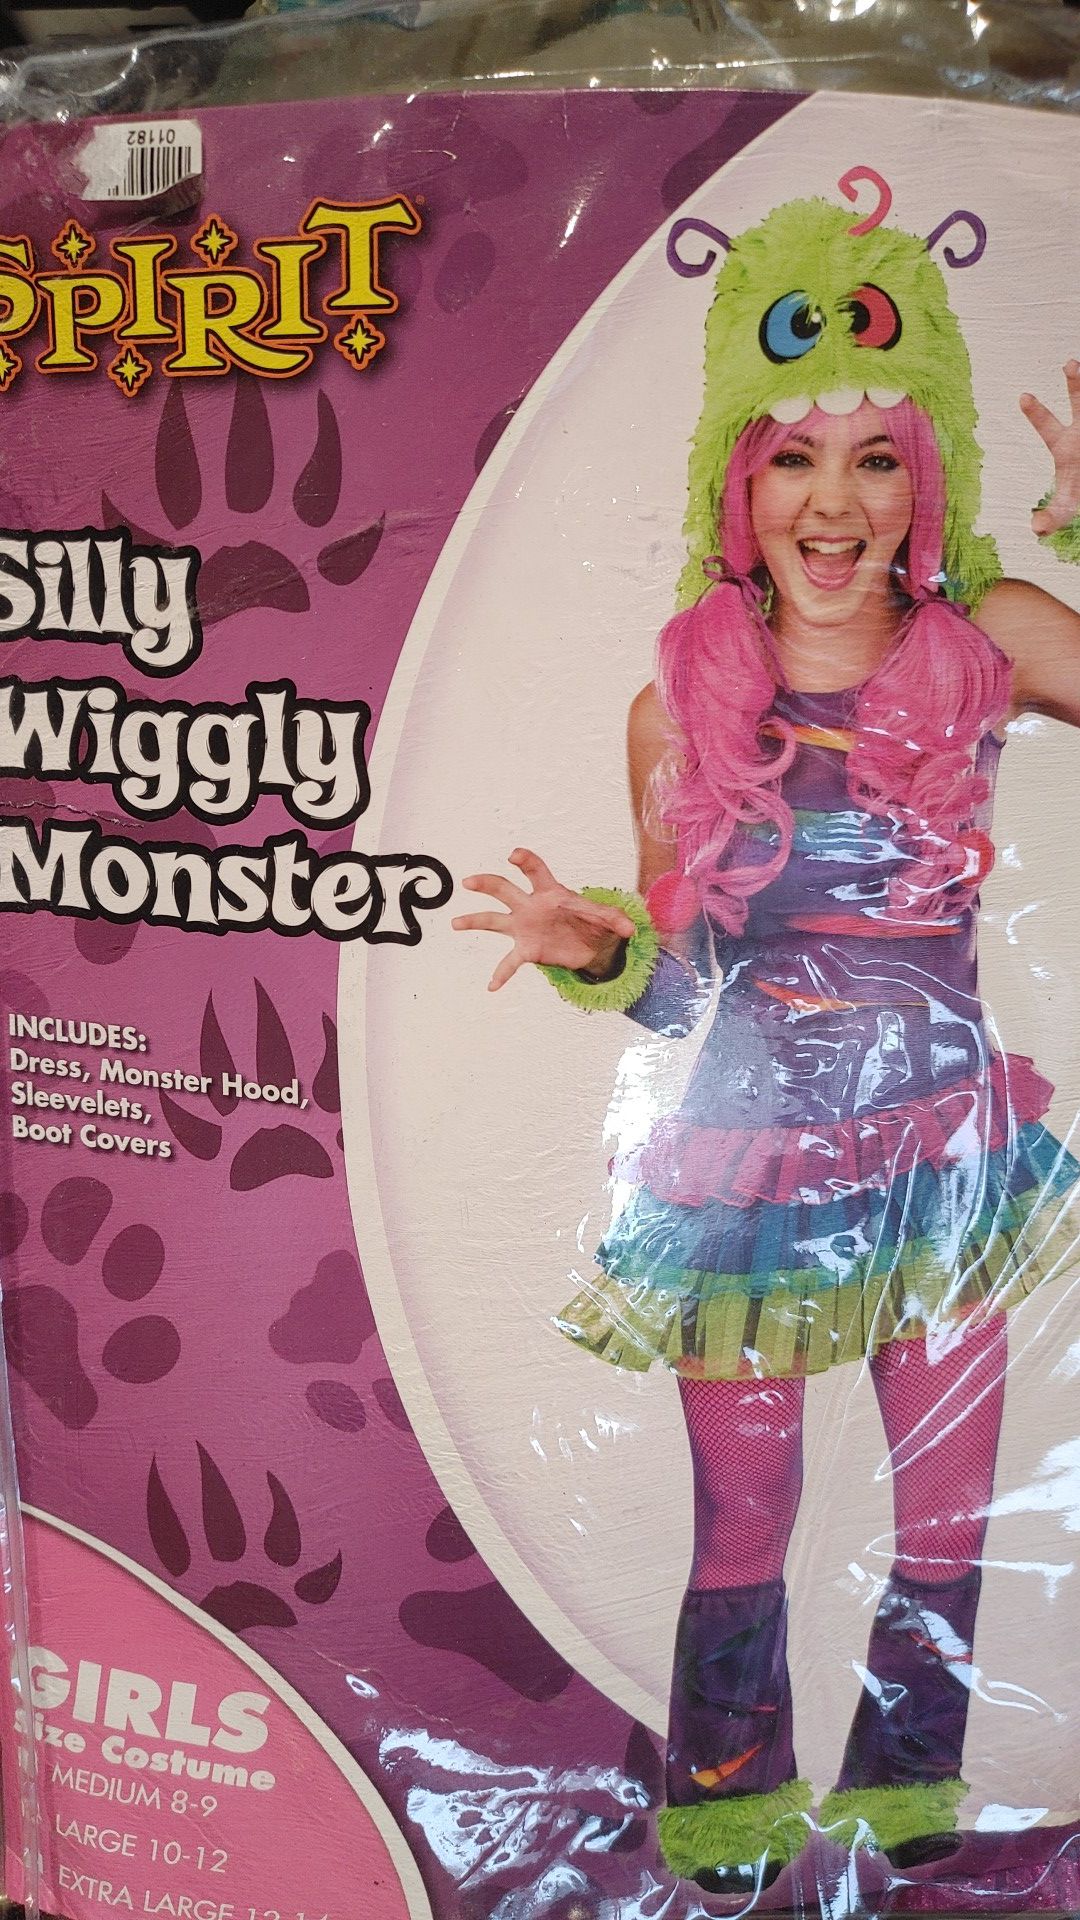 Kids Costumes girls Silly wiggly Monster Size 10/12